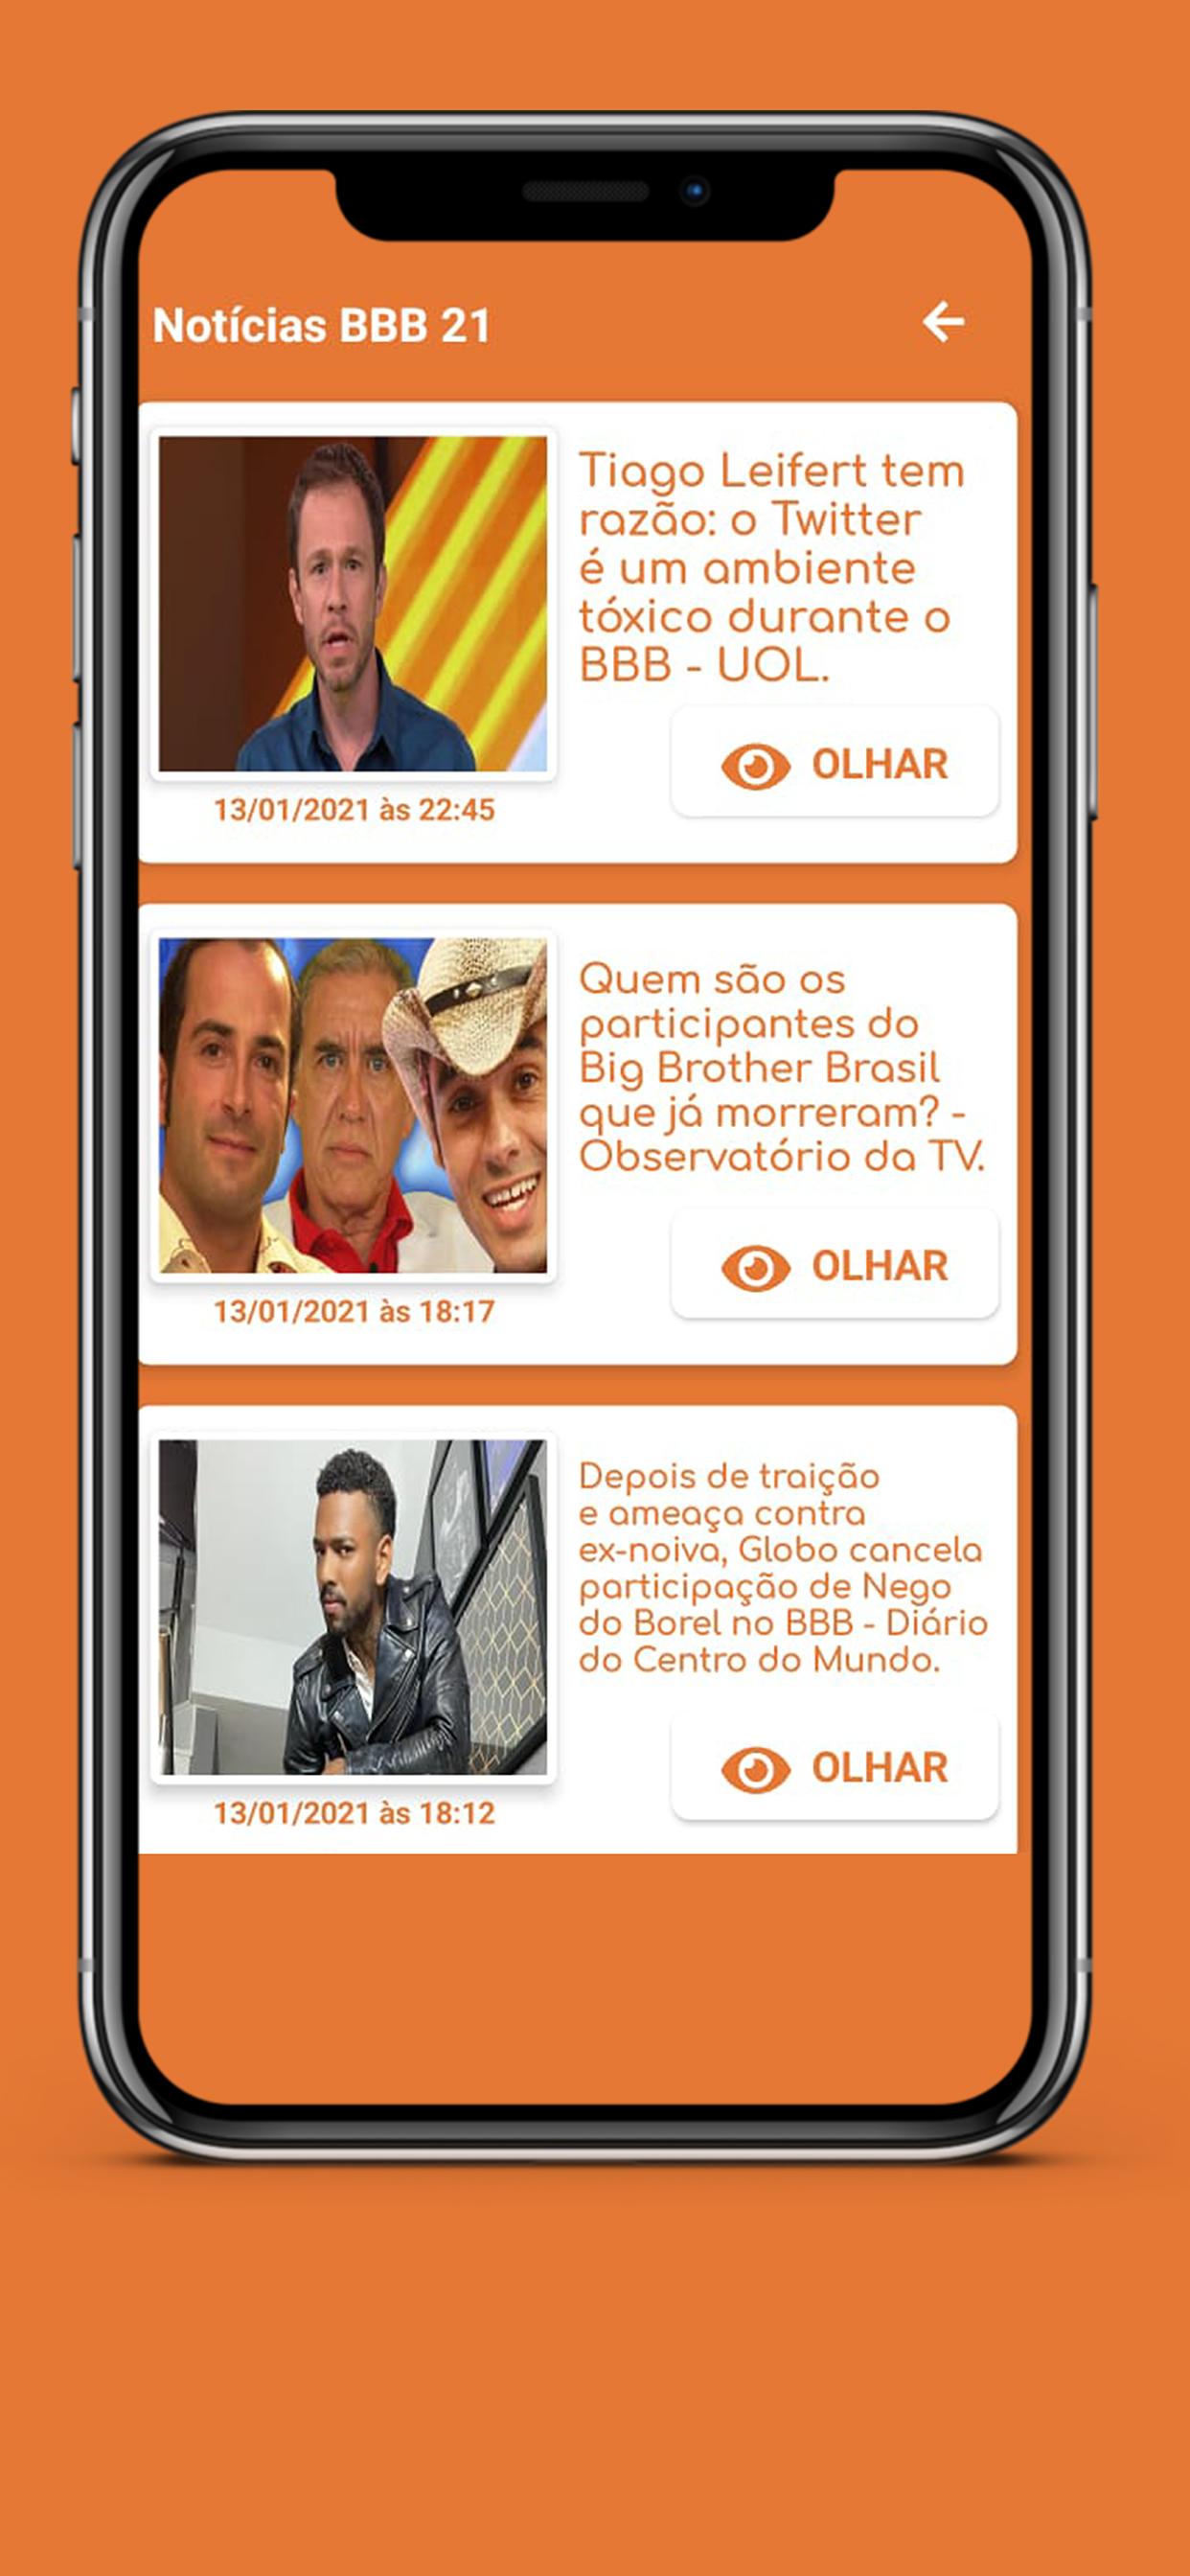 BBB 21 - Ao vivo chat for Android - APK Download